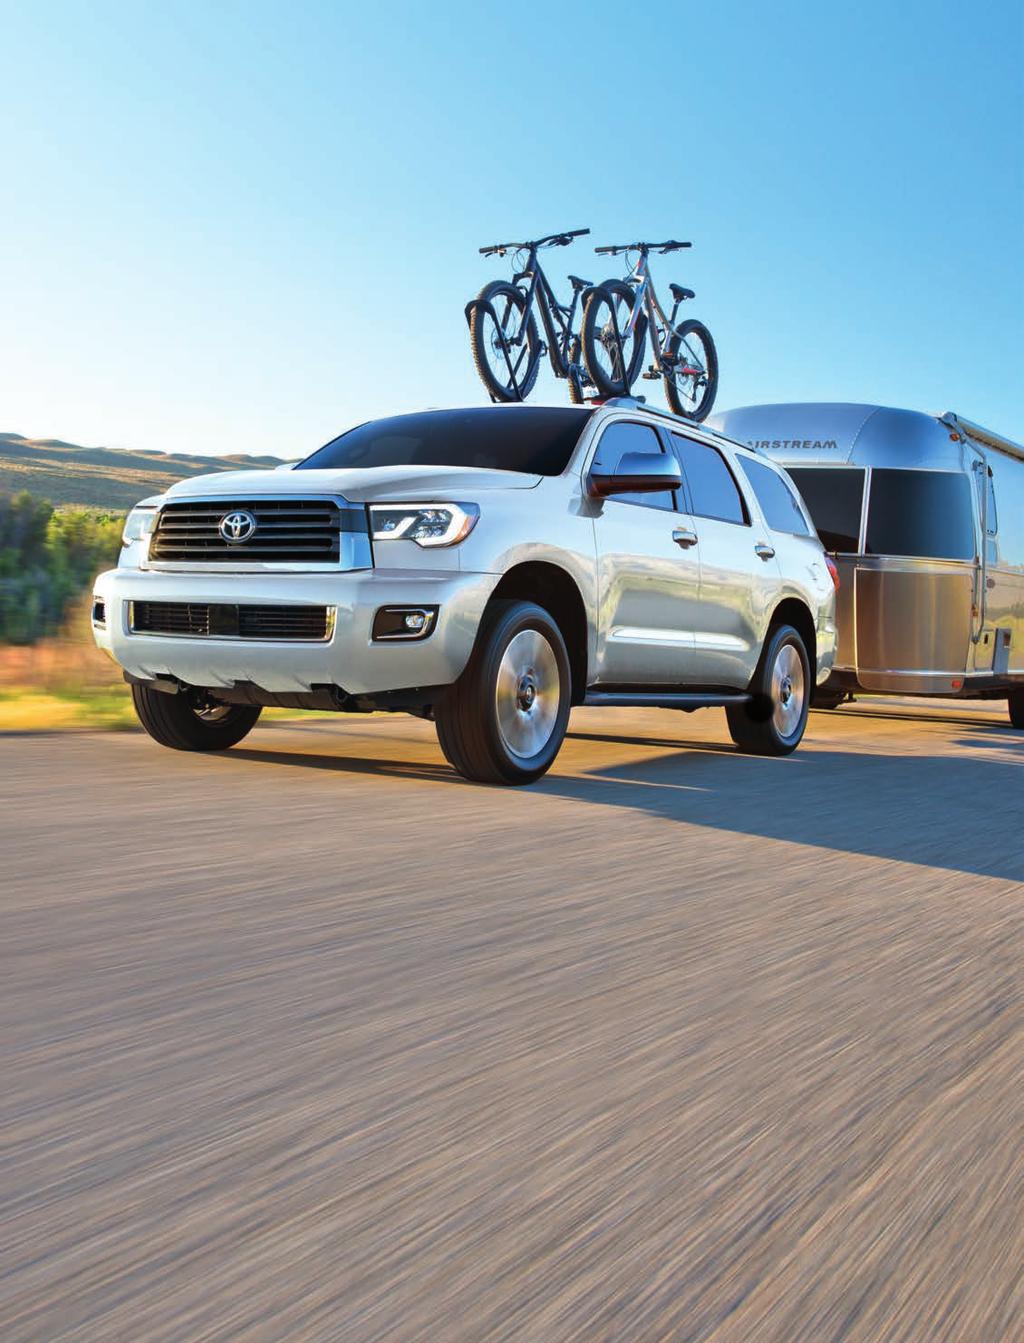 POWERFULLY CAPABLE FRONT AND REAR SUSPENSION Sequoia s independent double-wishbone front and rear suspension gives you the best of both worlds: responsive handling on pavement and a smoother ride